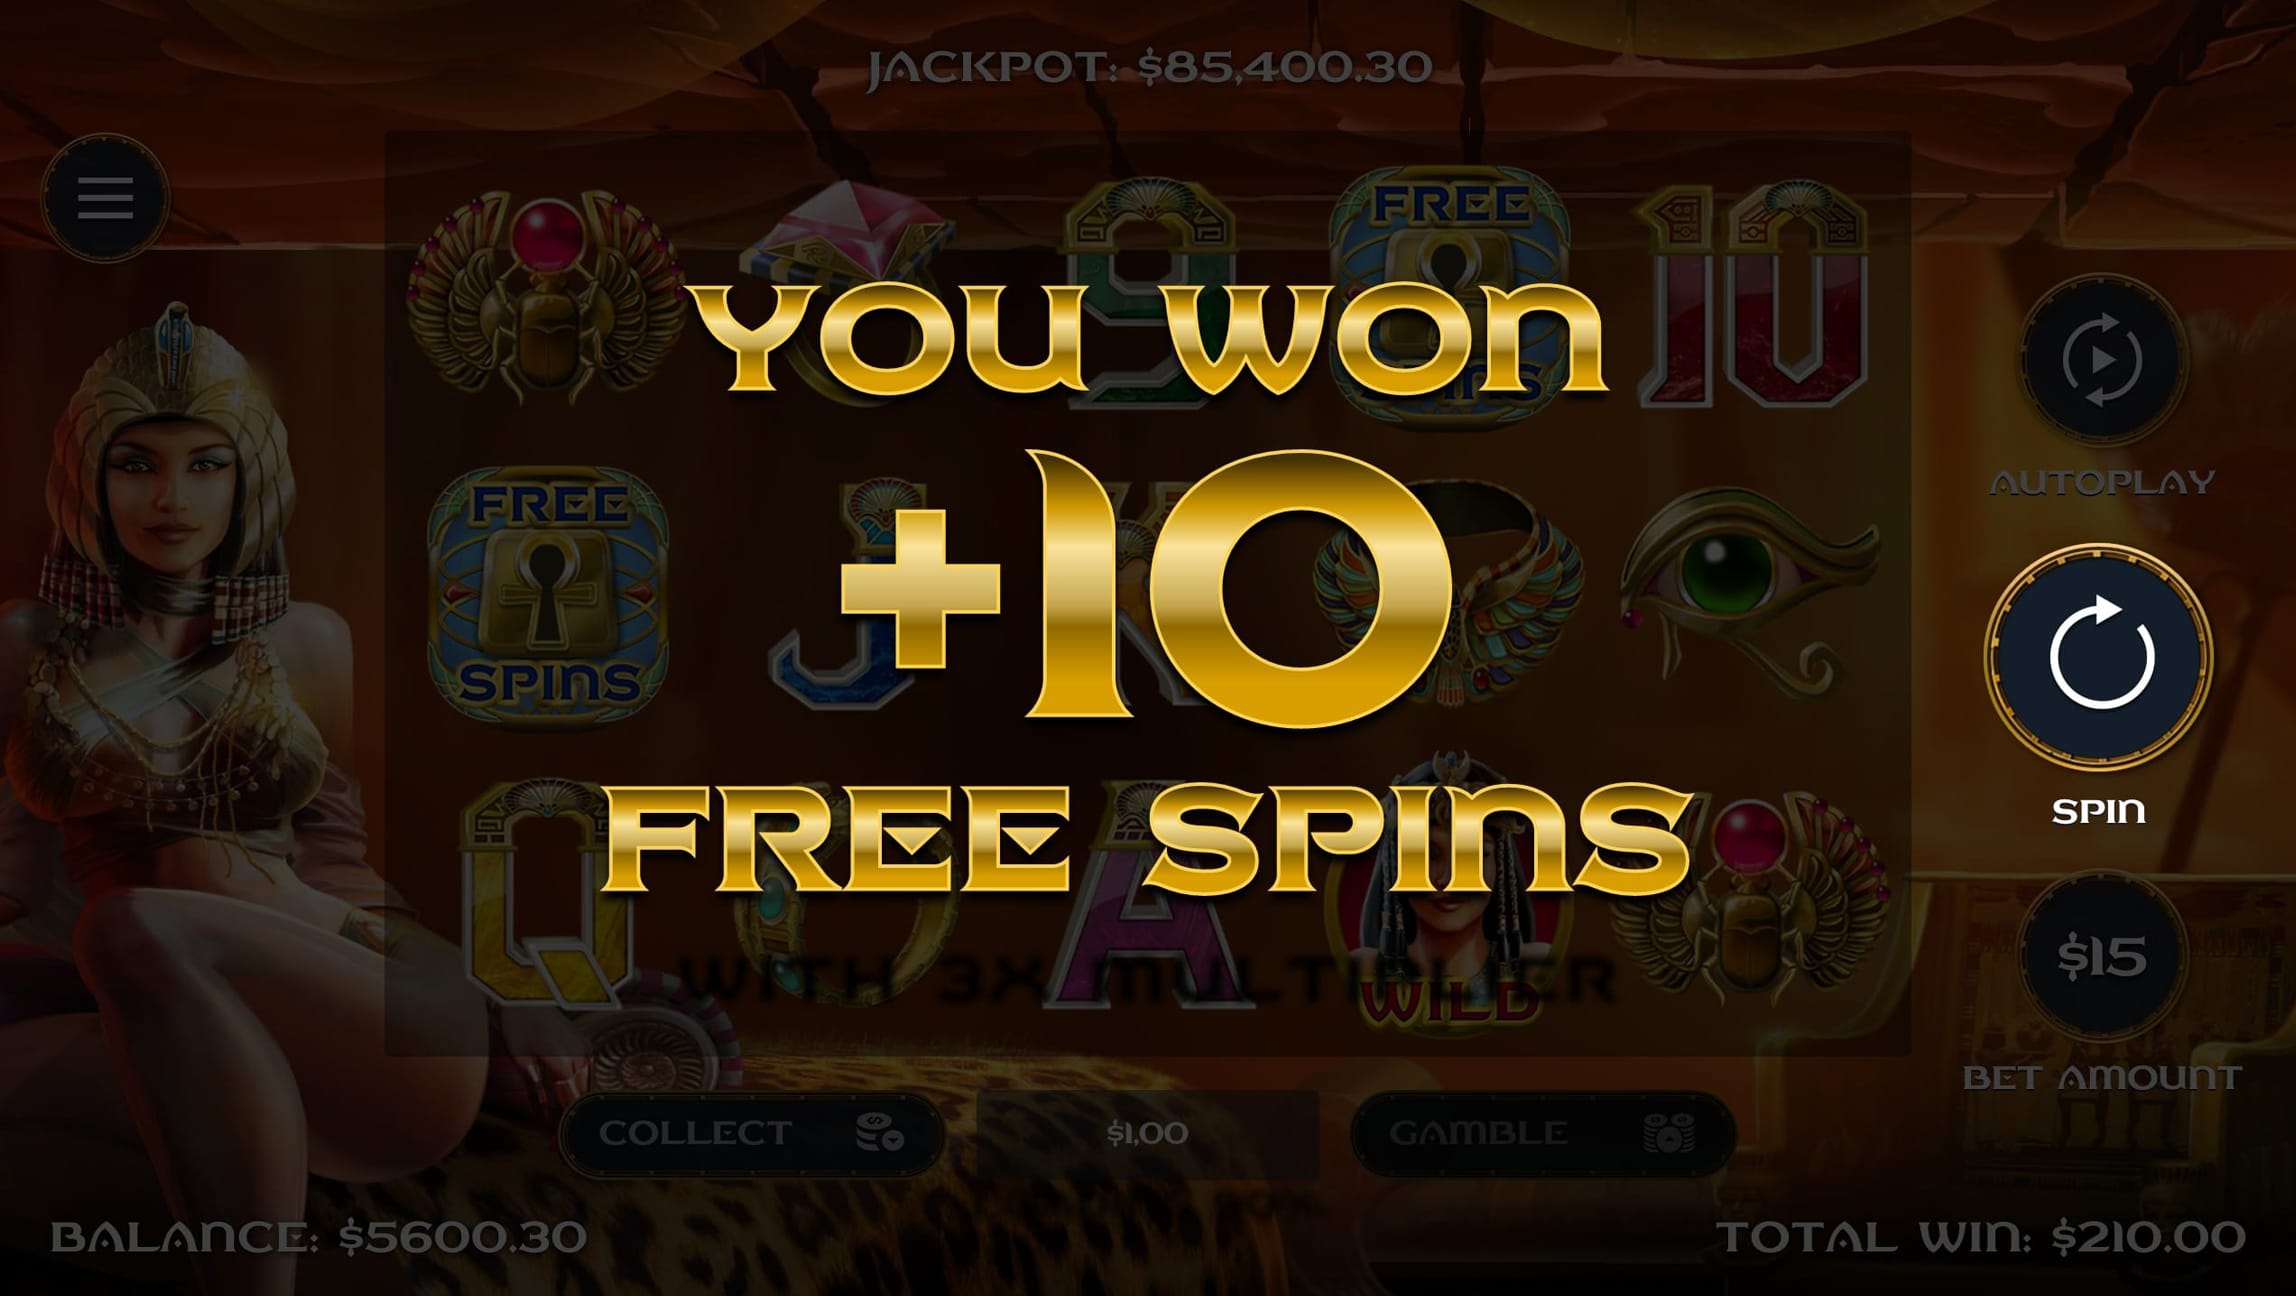 A night with cleo free spins screenshot